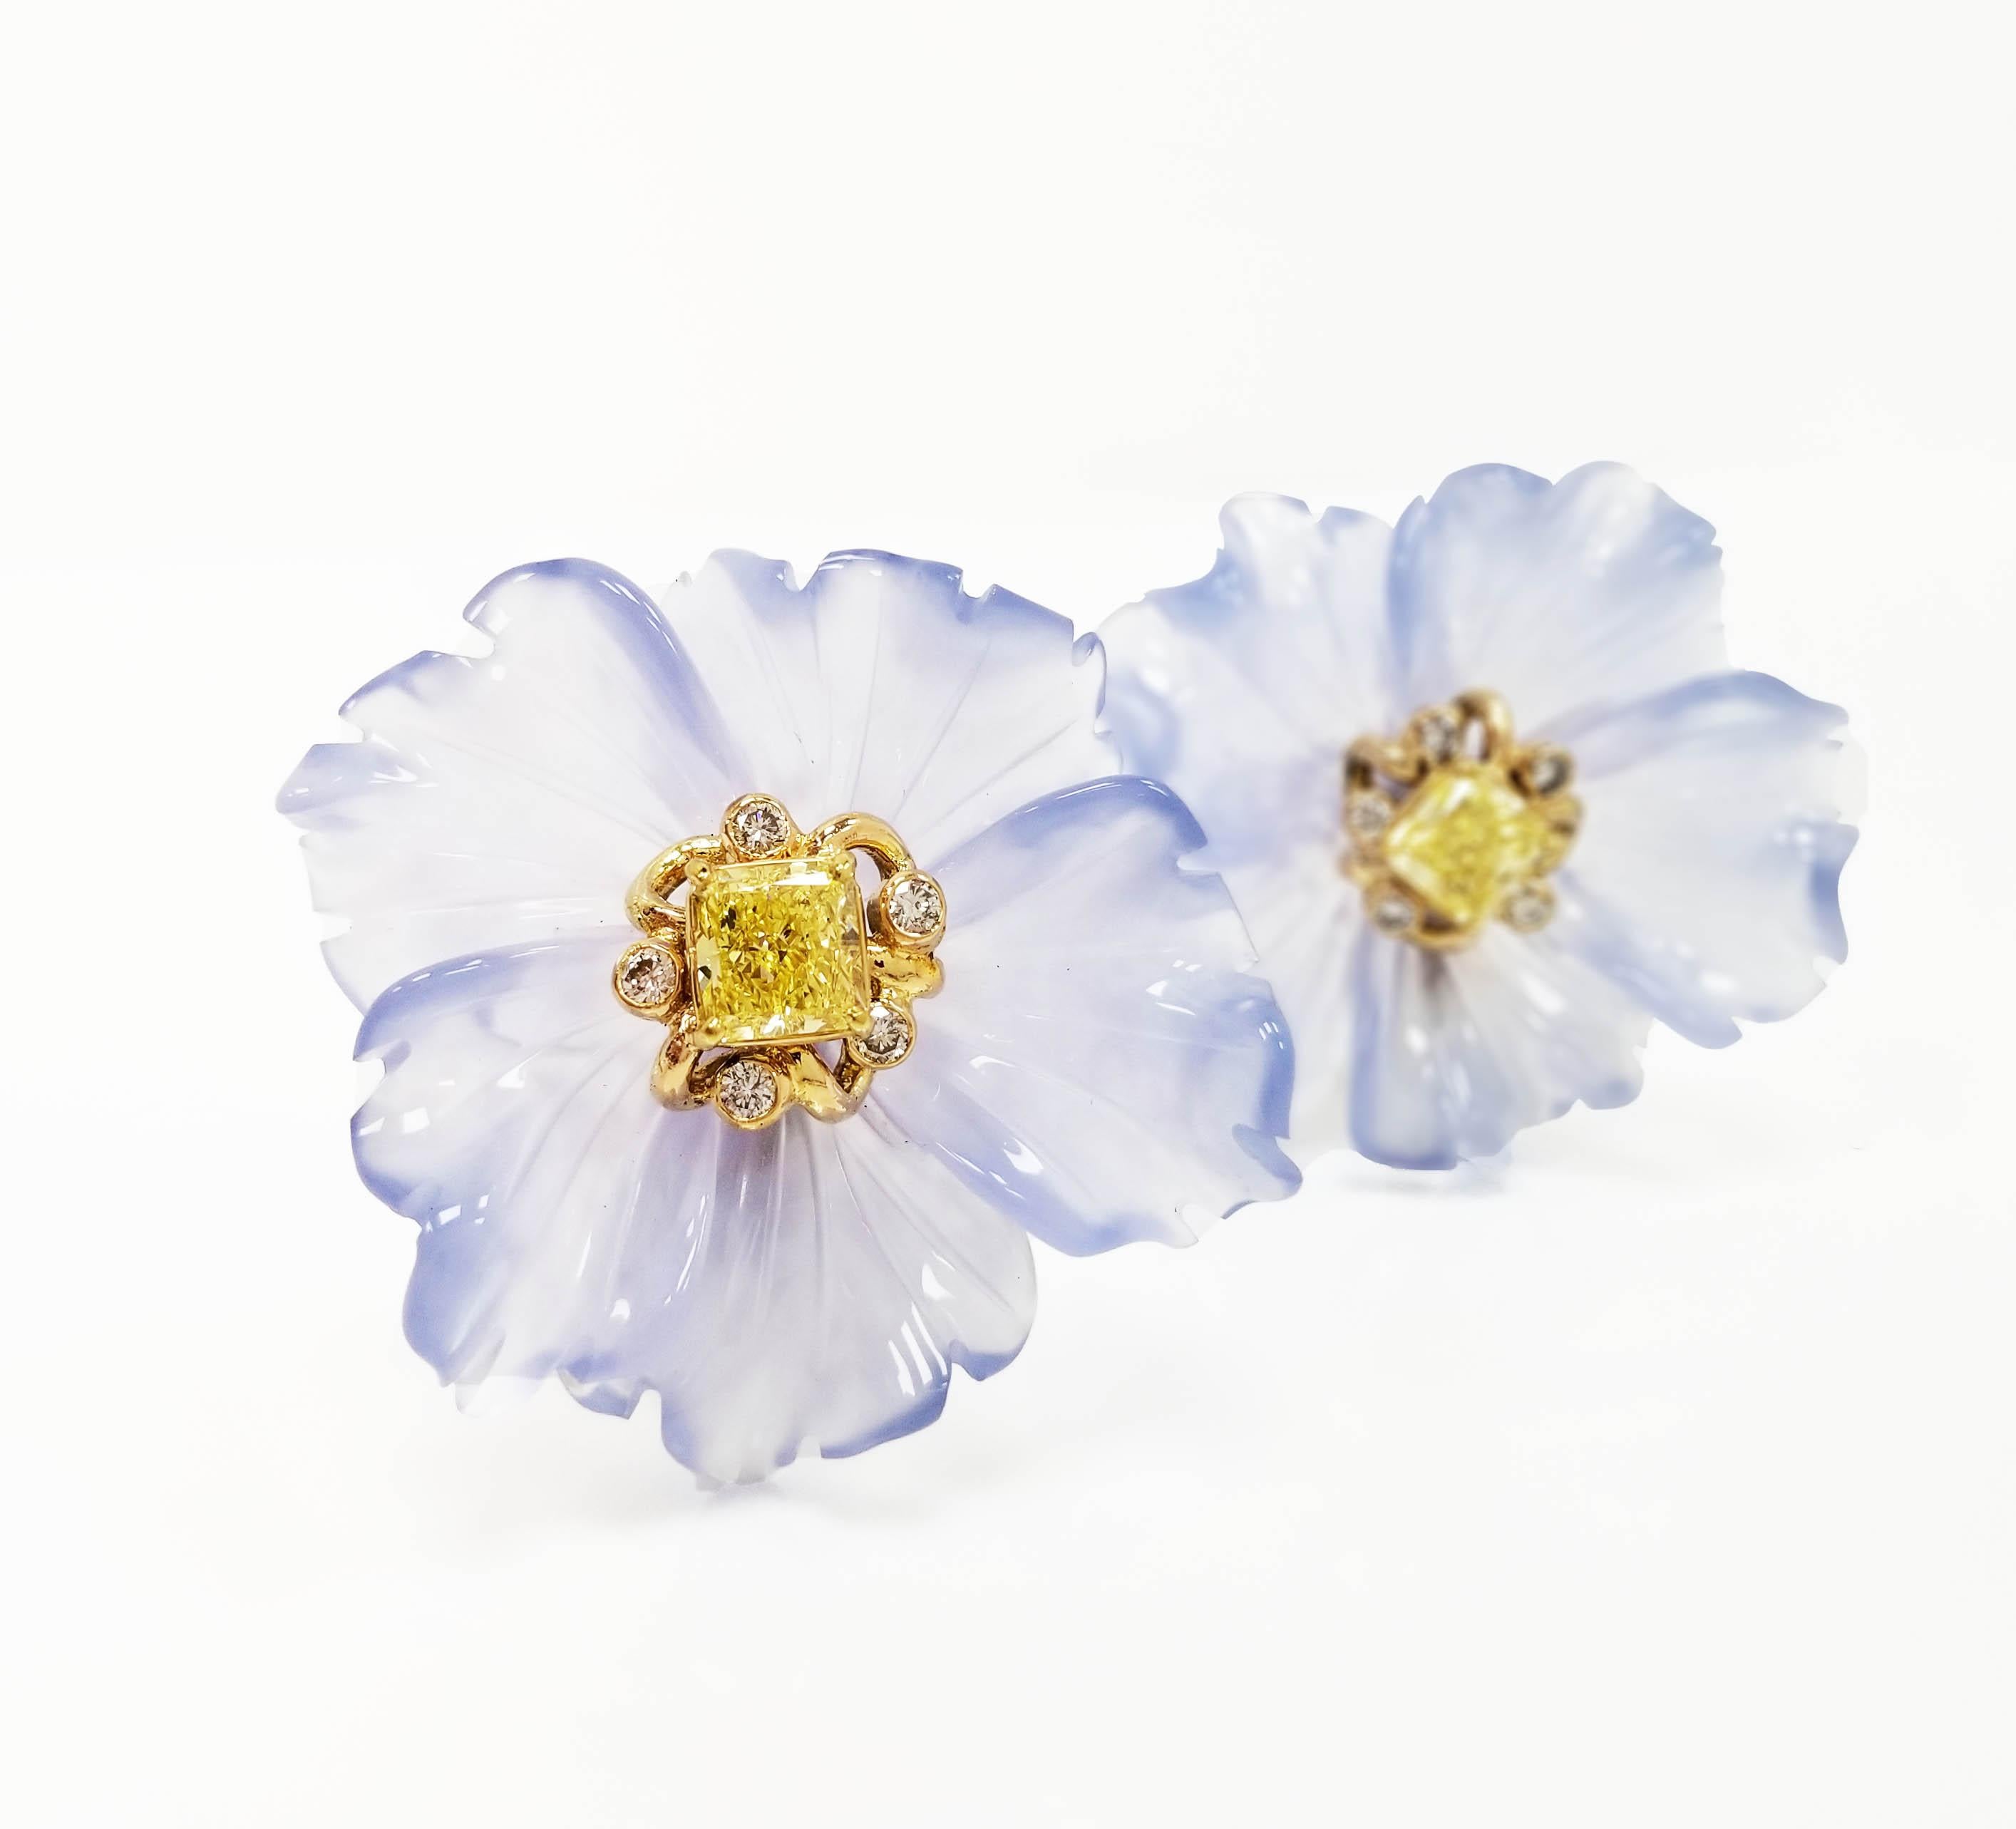 Cushion Cut Scarselli GIA Fancy Intense Yellow Diamond Blue Floral Earrings By Rebecca Koven For Sale